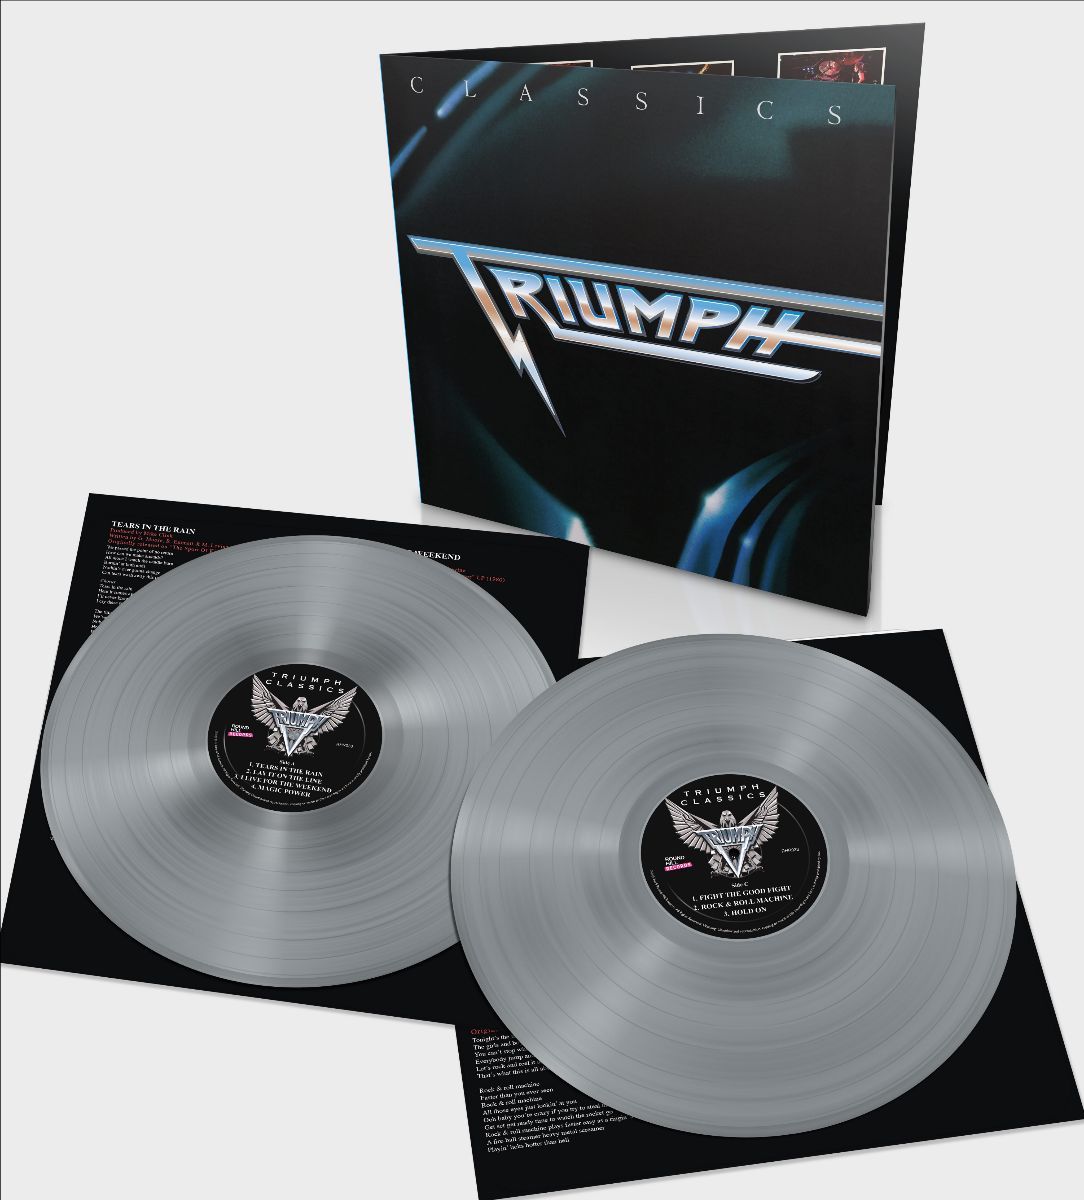 TRIUMPH ‘CLASSICS’ TO BE RE-RELEASED AS A DOUBLE LP, PRESSED ON 180 GRAM SILVER VINYL